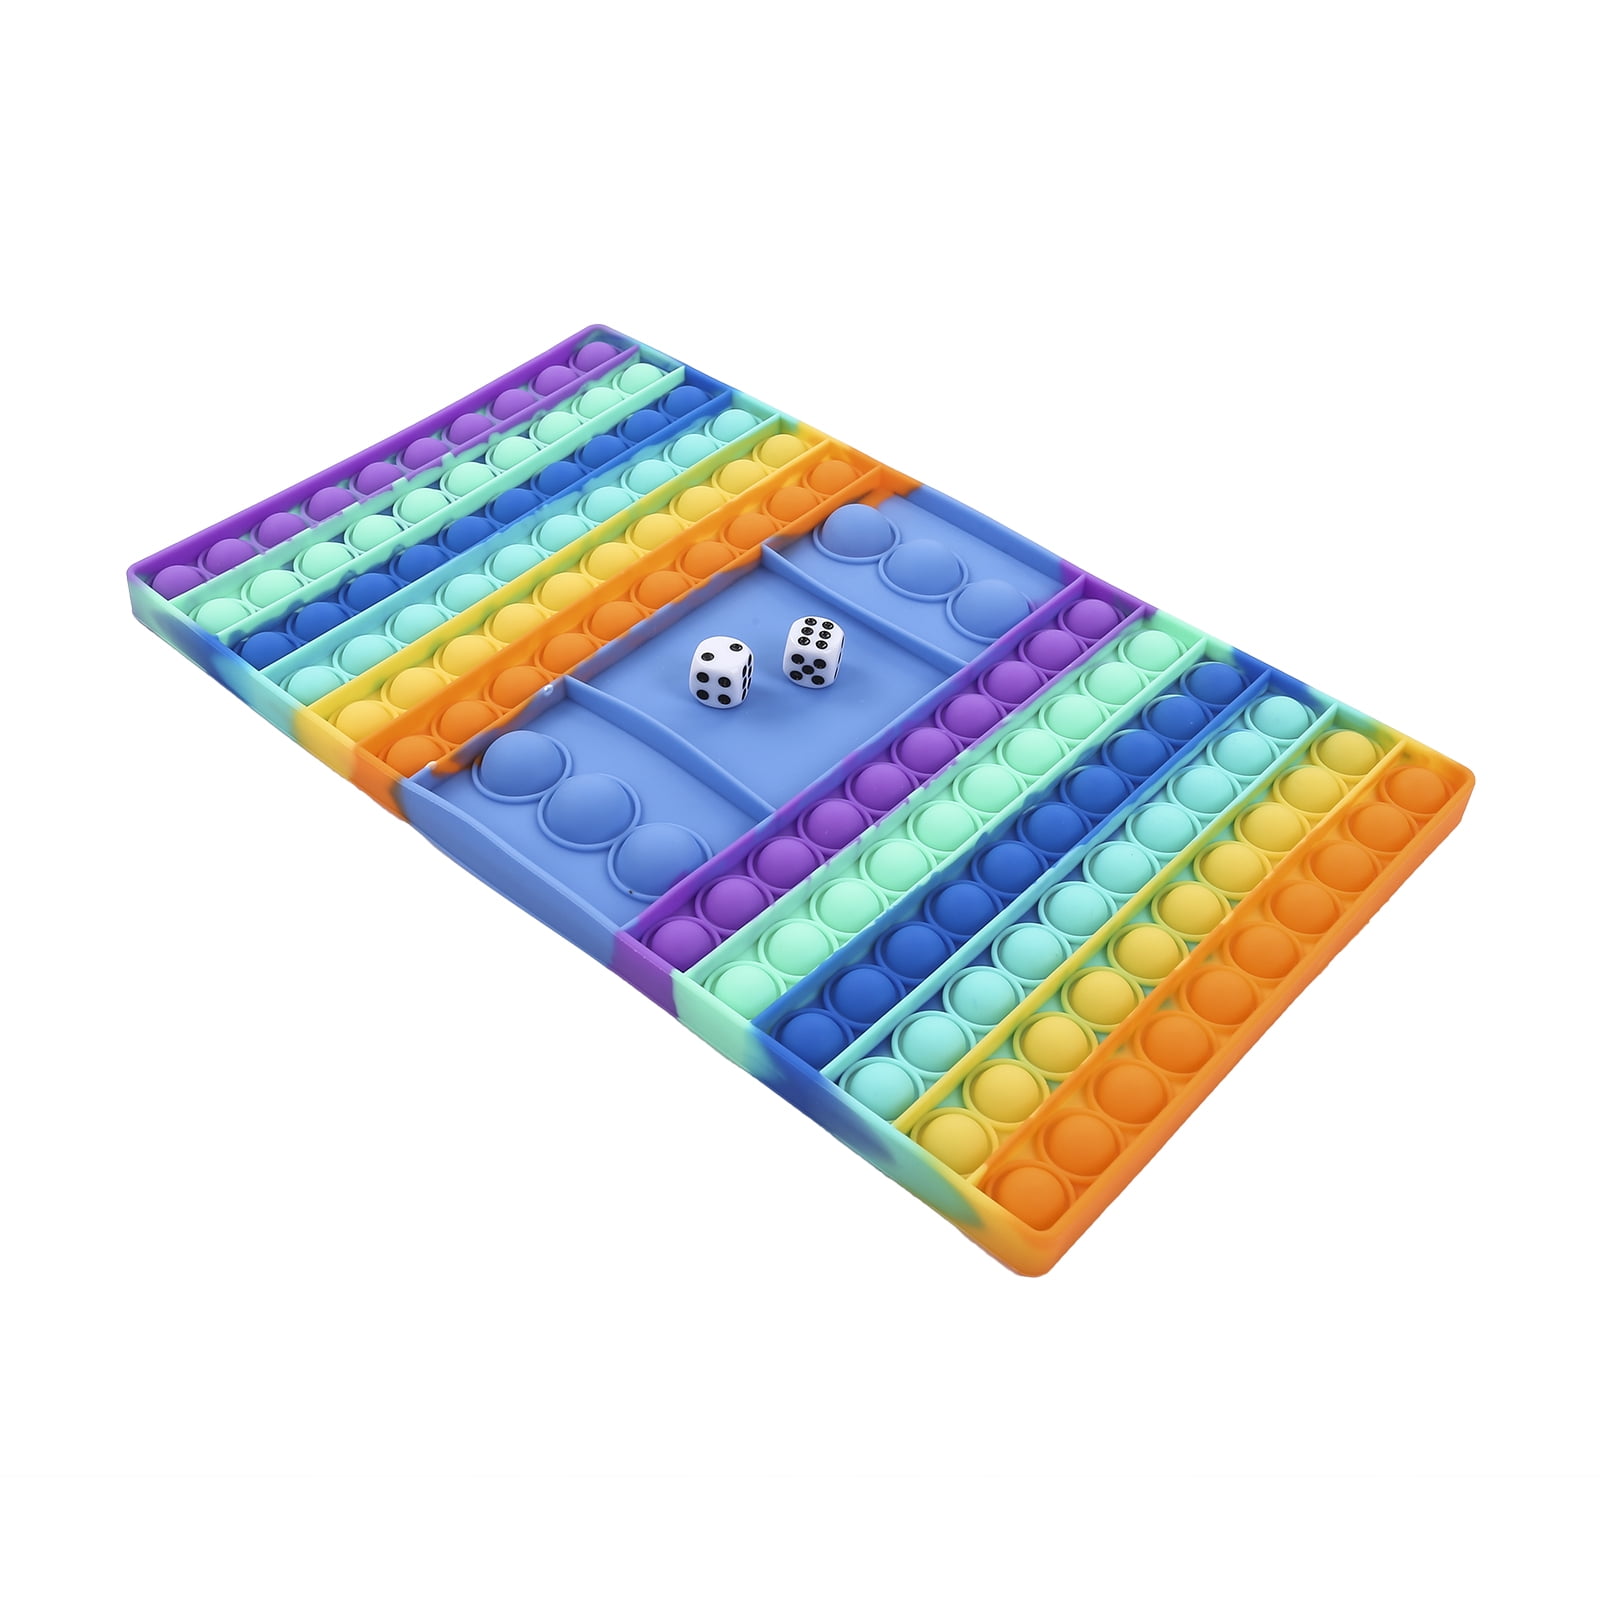 Autism Special Needs Stress Reliever Big Size Push Pop Sensory Extra Large Bubble Sensory Chess Board Push Bubble Popper Fidget Sensory Toys,Suitable for People with ADHD 